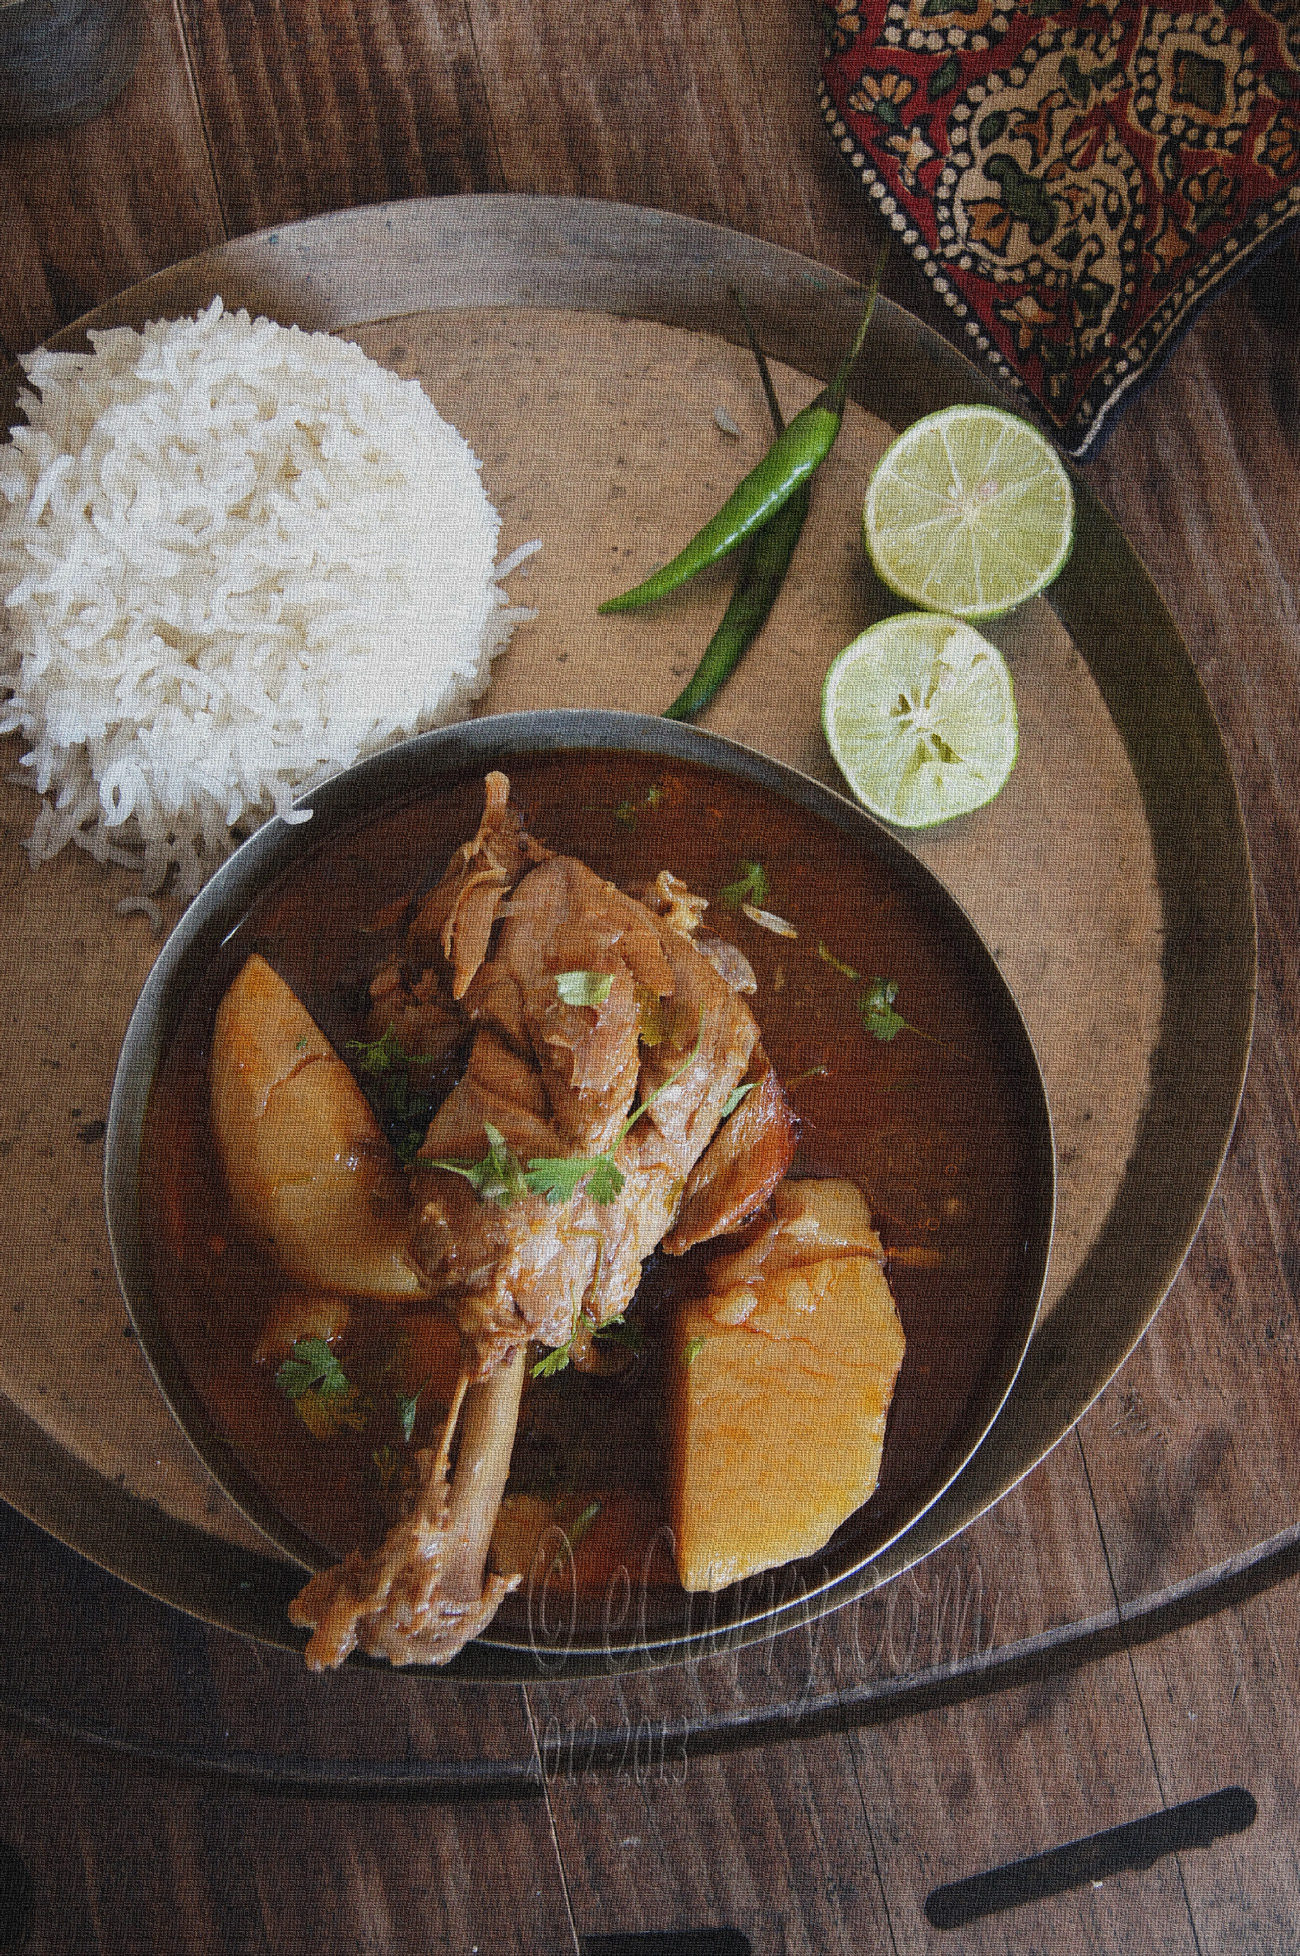 Robibar-er Murgi-r Jhol: Sunday afternoon Chicken Curry | eCurry - The ...